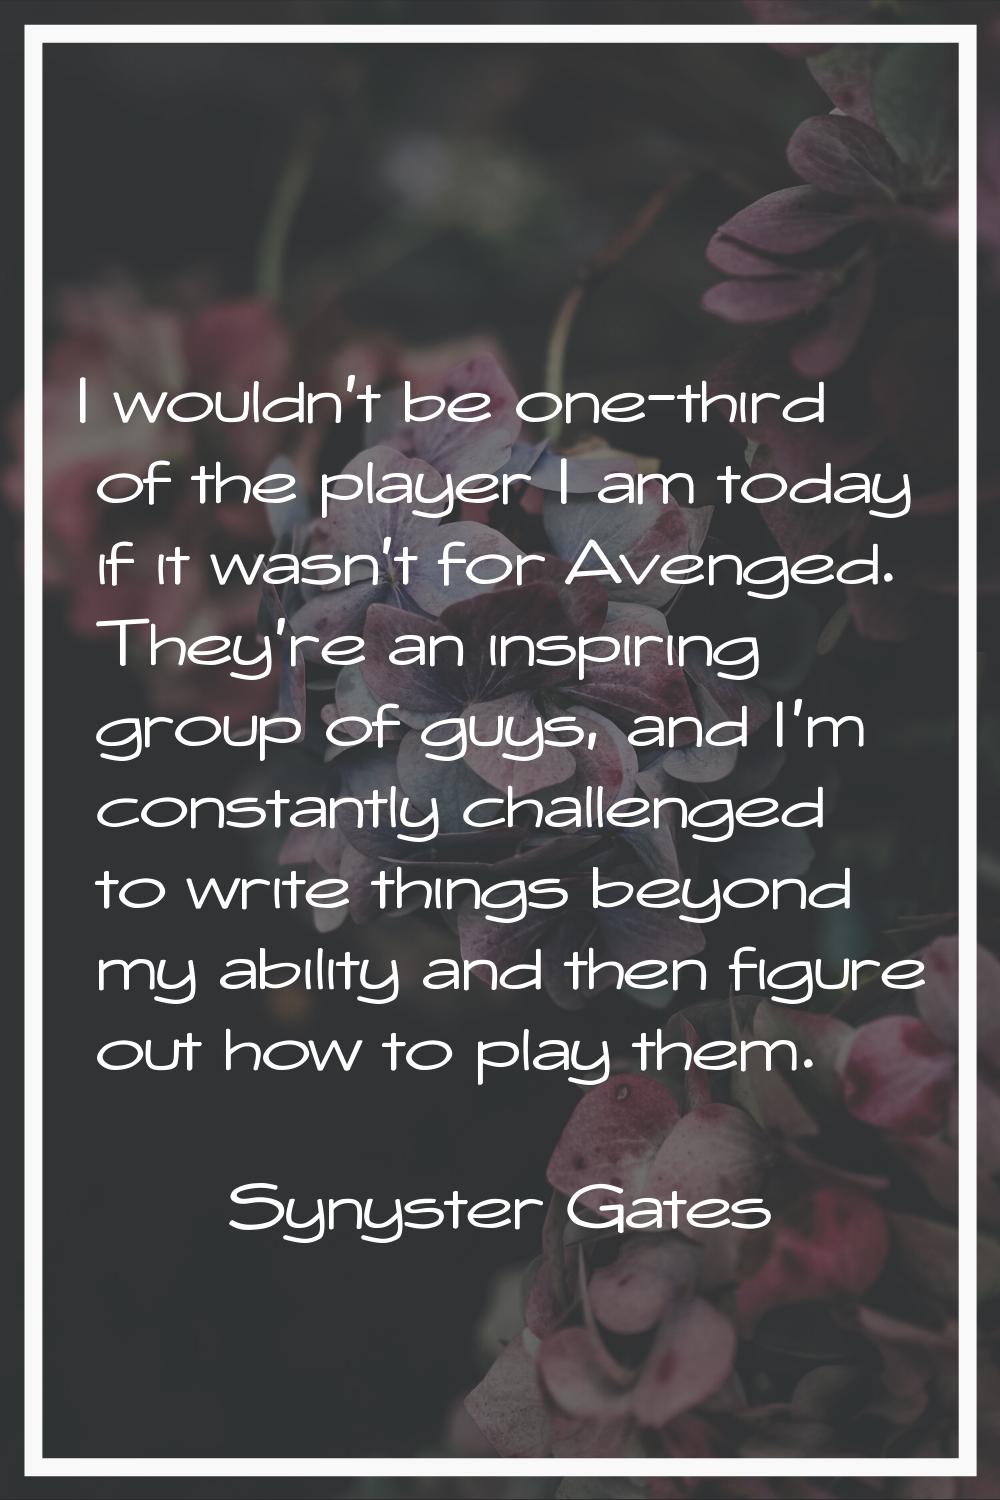 I wouldn't be one-third of the player I am today if it wasn't for Avenged. They're an inspiring gro